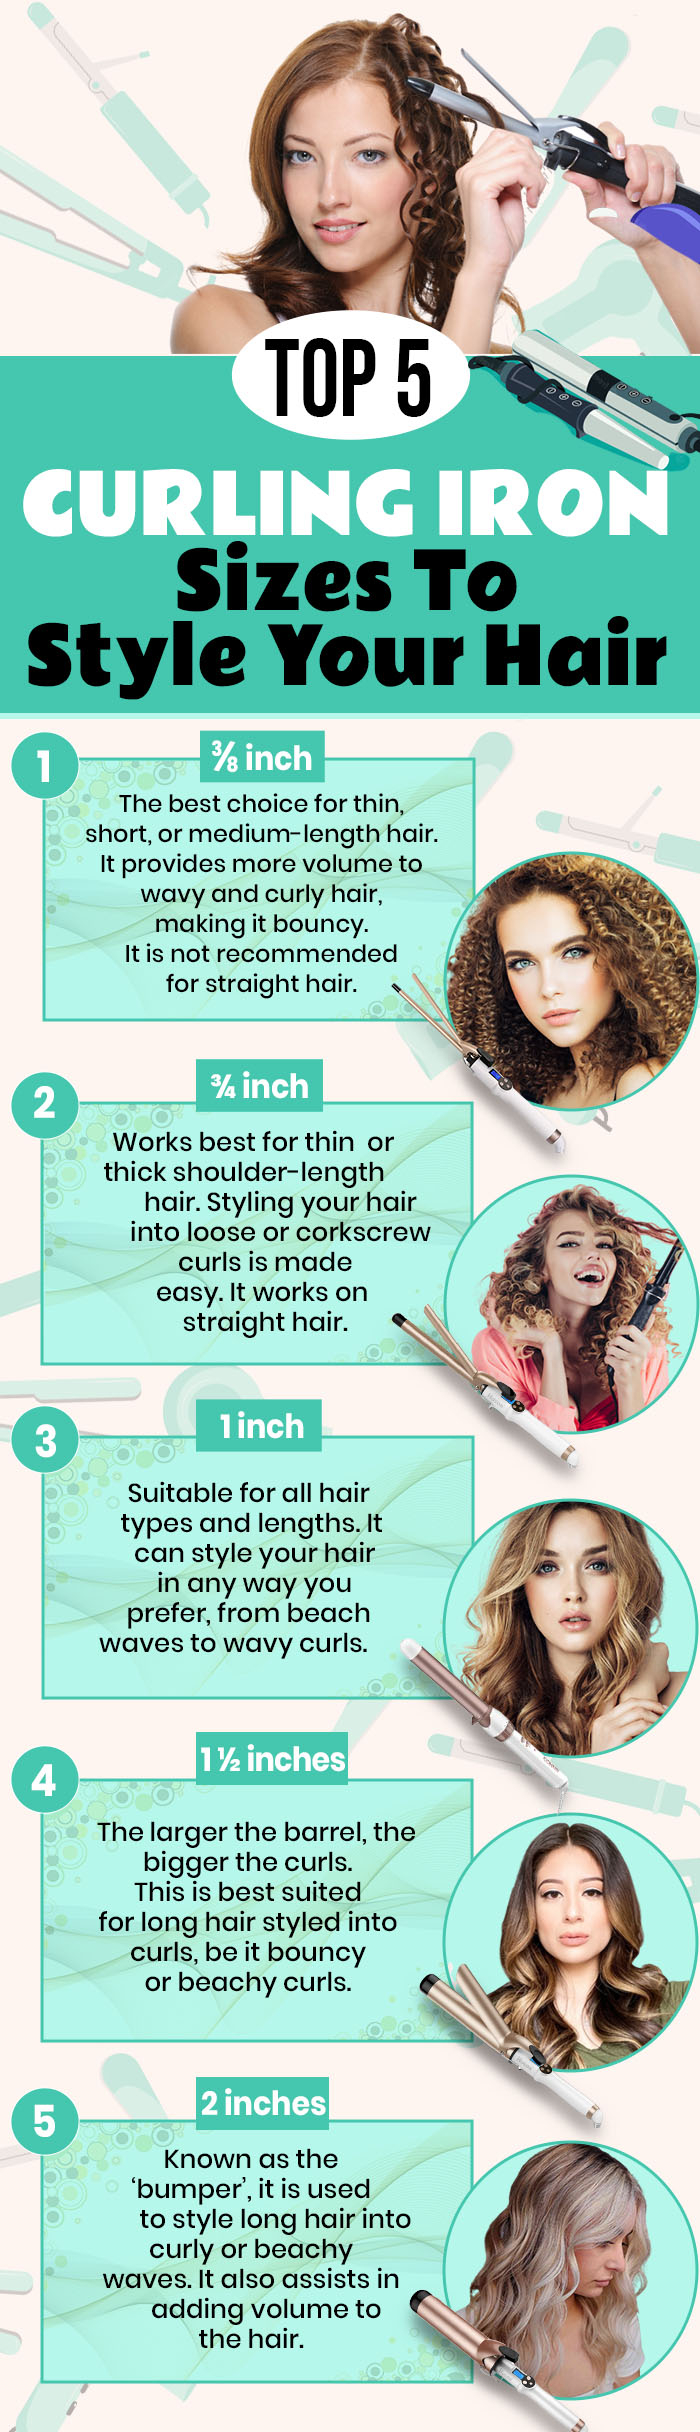 Top 5 Curling Iron Sizes To fashion Your Hair